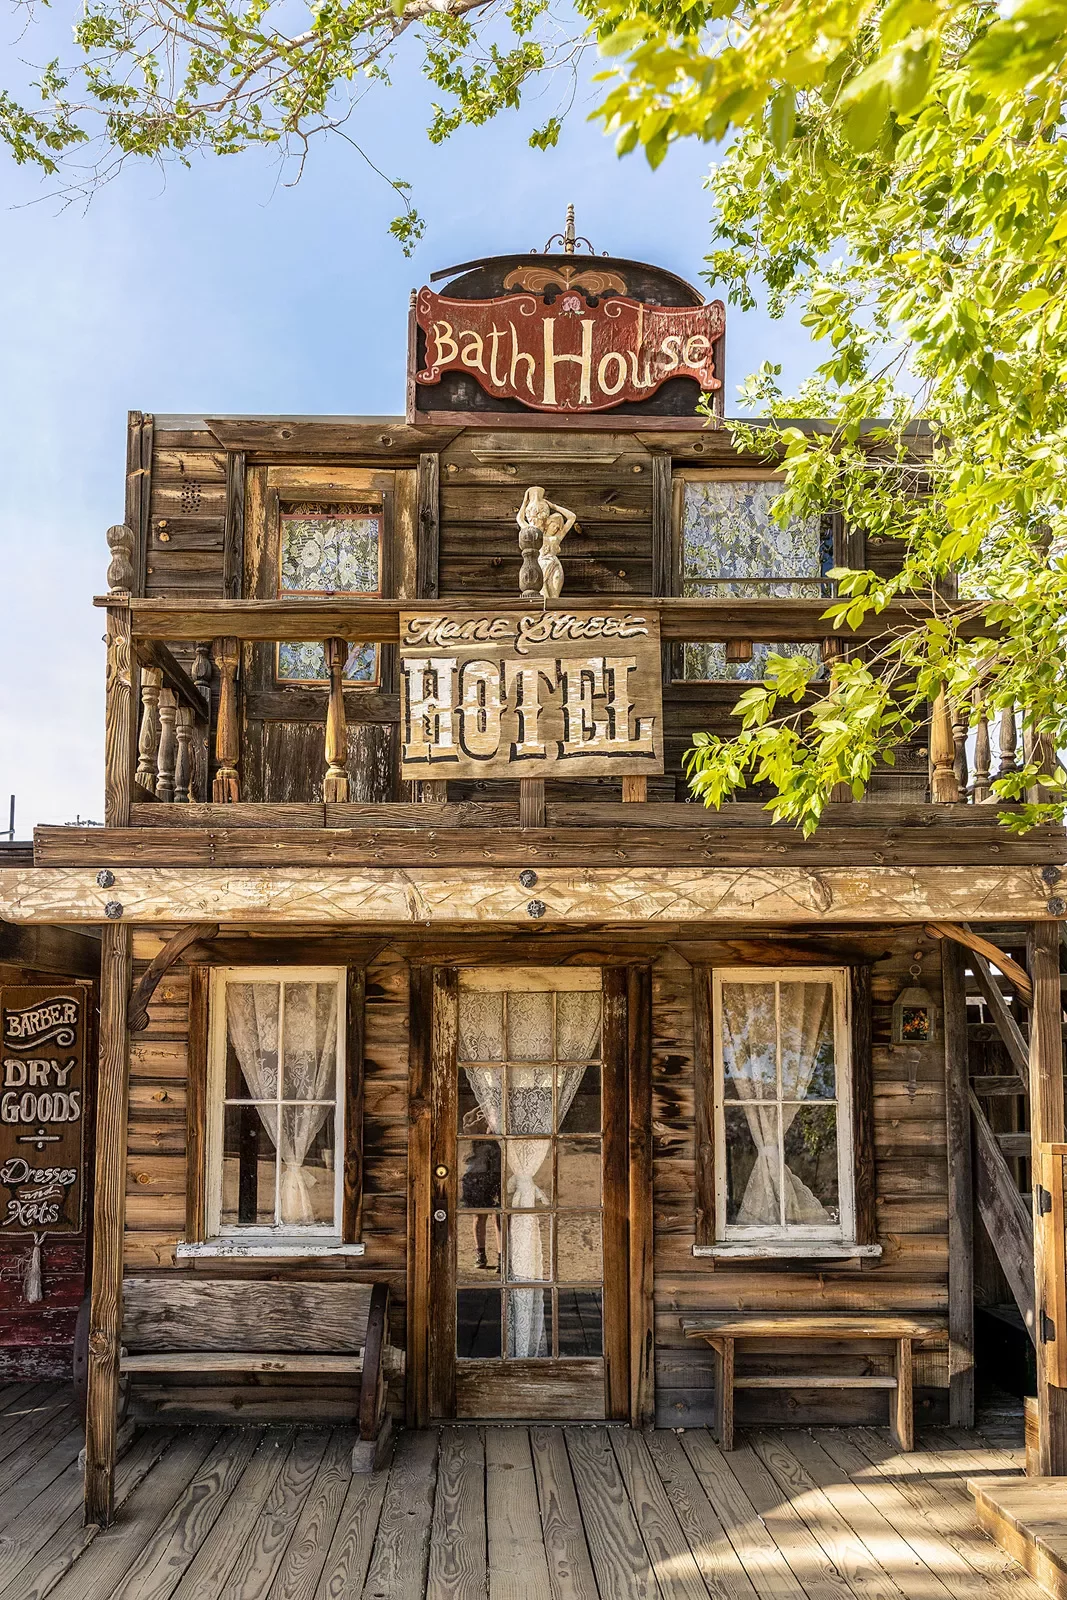 Storefront shot of the &quot;MANE STREET HOTEL&quot;, old west style building.